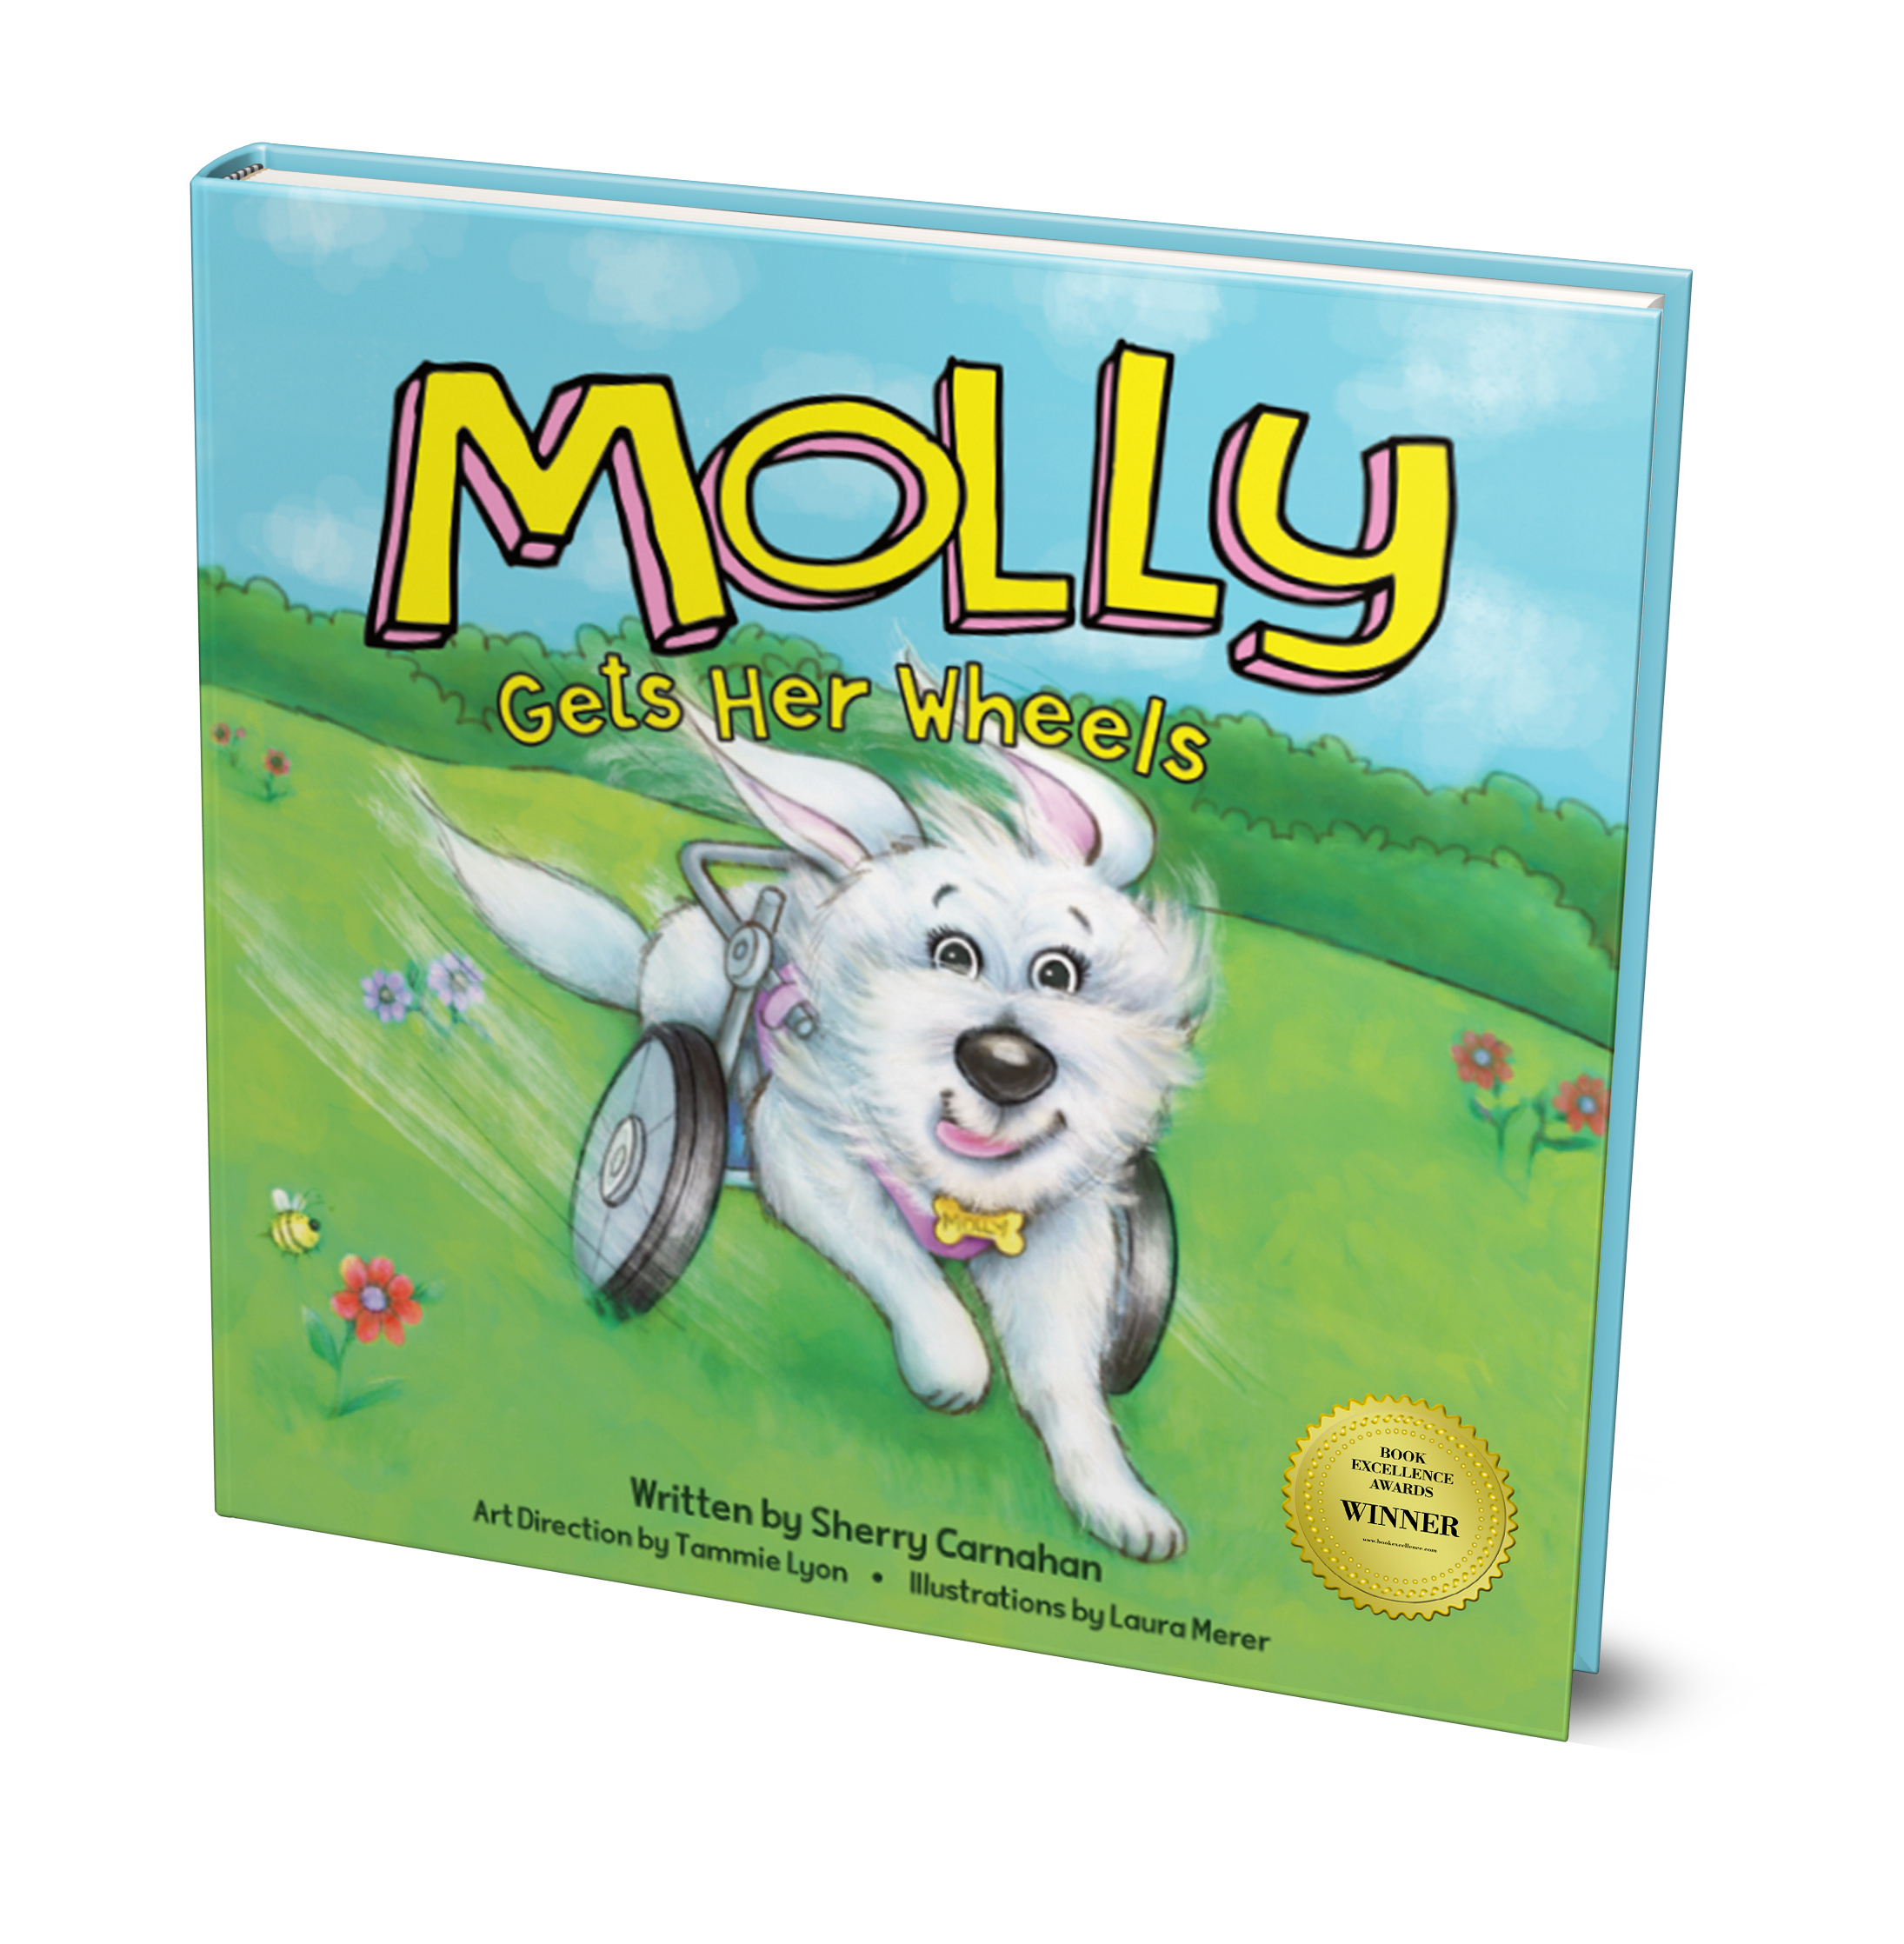 Sherry Carnahan’s, Molly Gets Her Wheels, is Recognized as a Winner in International Book Contest